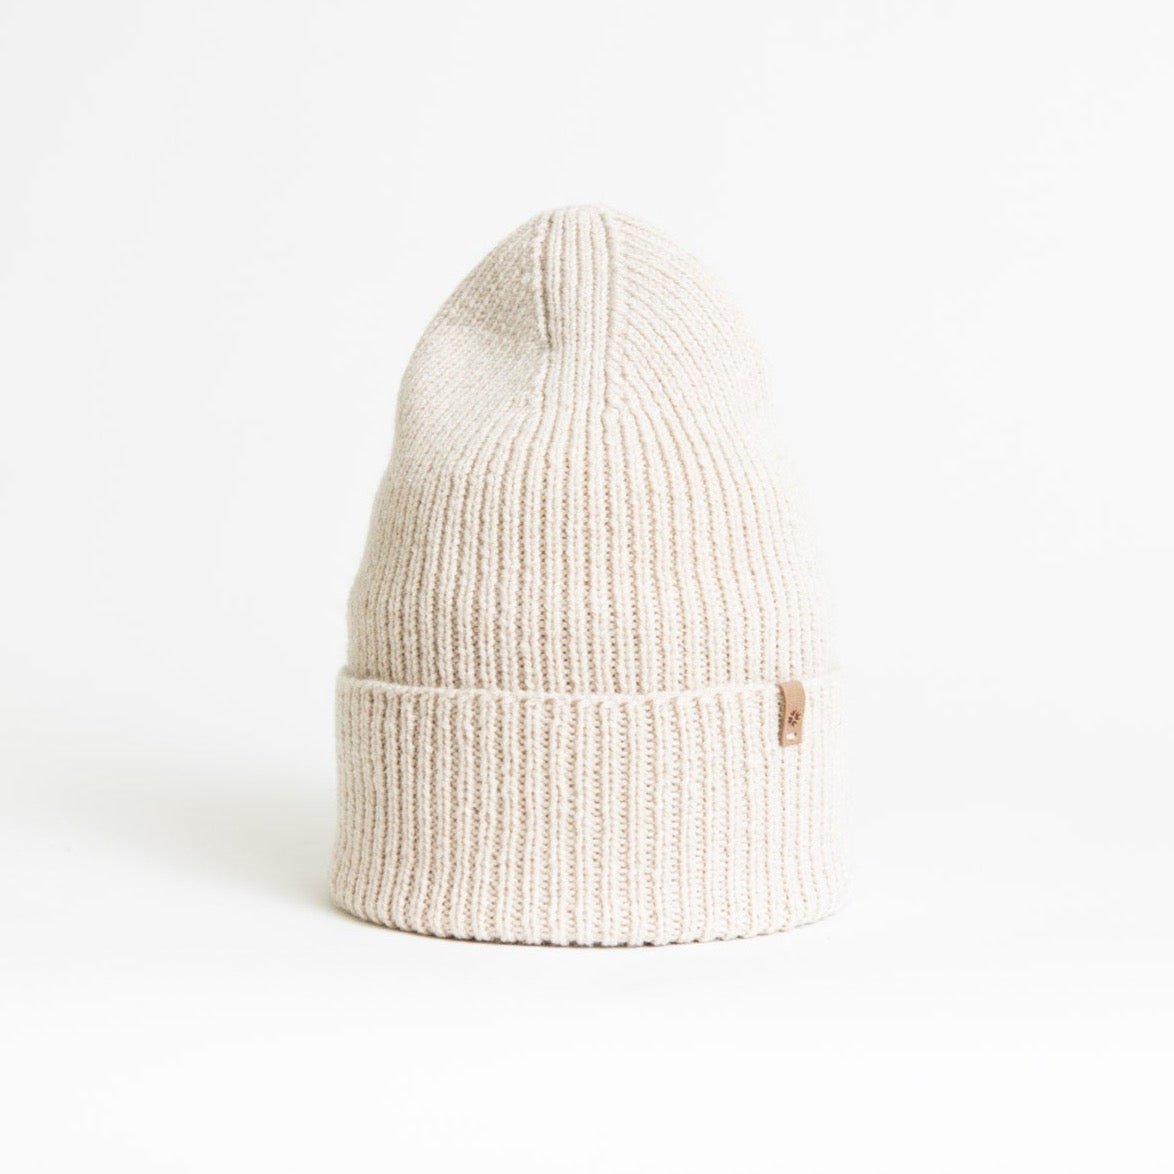 A warm cream colored knitted and cuffed hat with a decrease detail on top. The Merino Rib Hat in Almond White is designed by Dinadi and hand knitted in Kathmandu, Nepal.